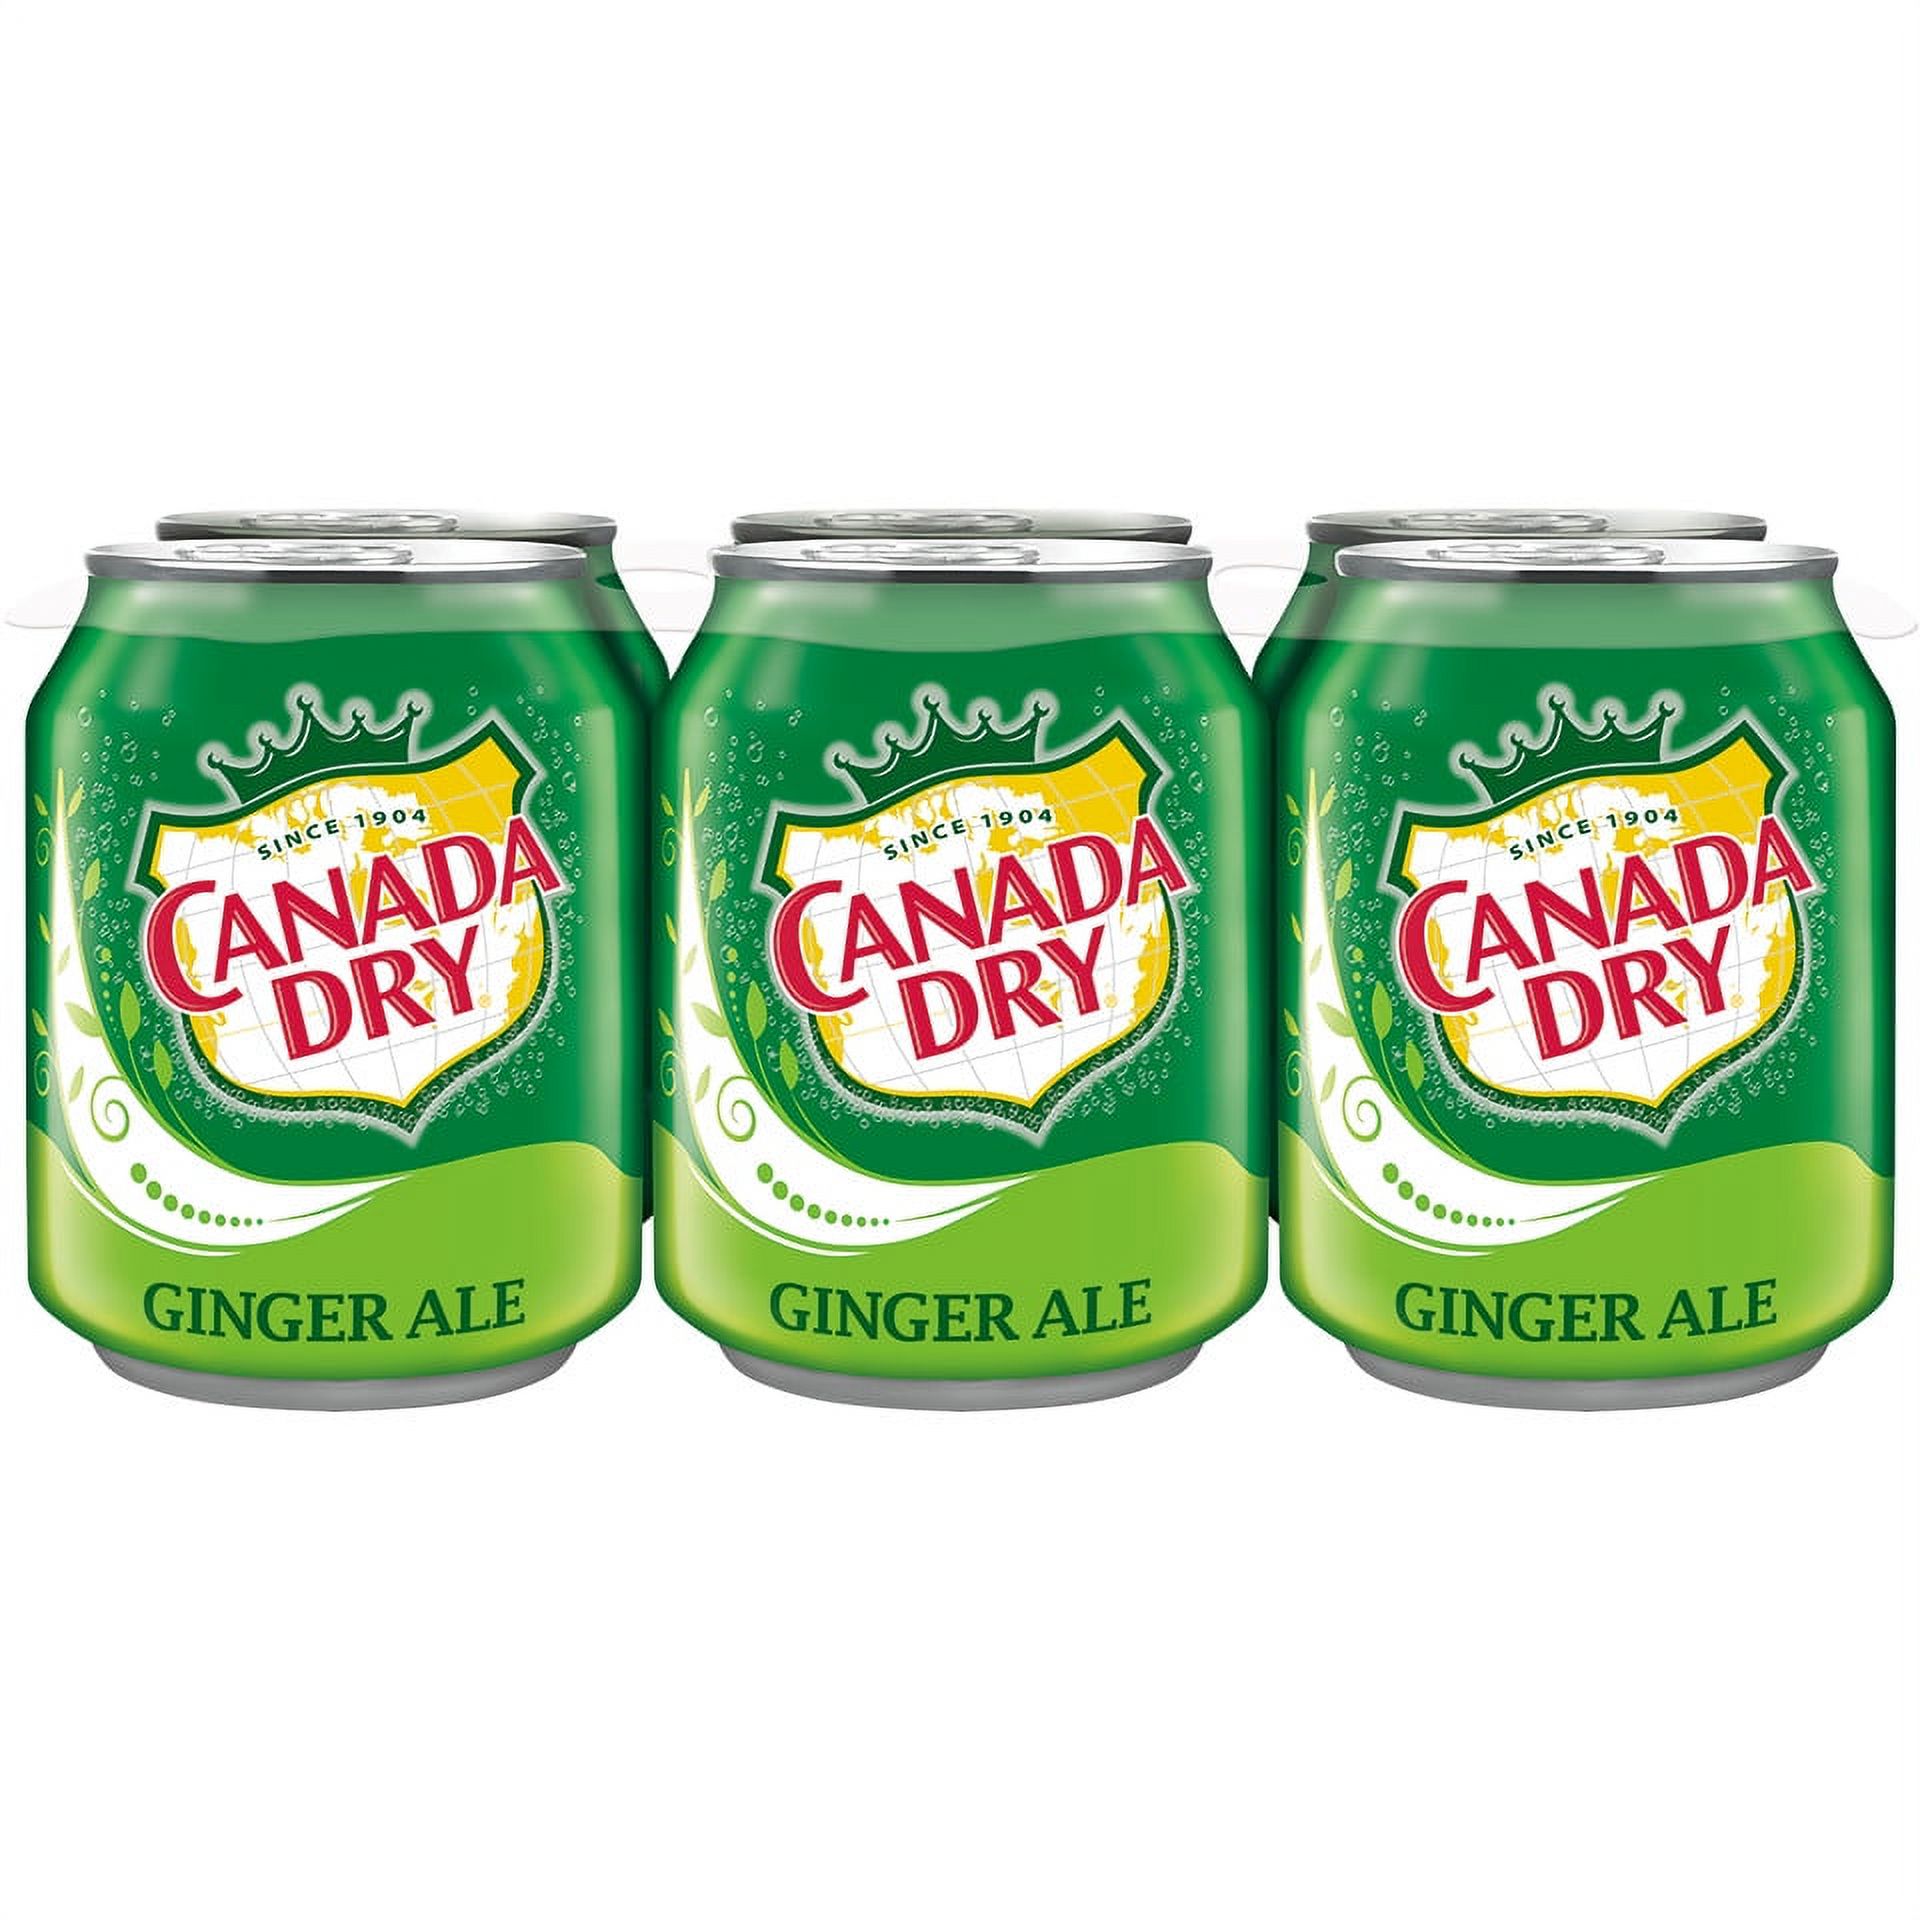 Canada Dry Caffeine Free Ginger Ale Soda Pop, 8 fl oz, 6 Pack Cans - image 1 of 9